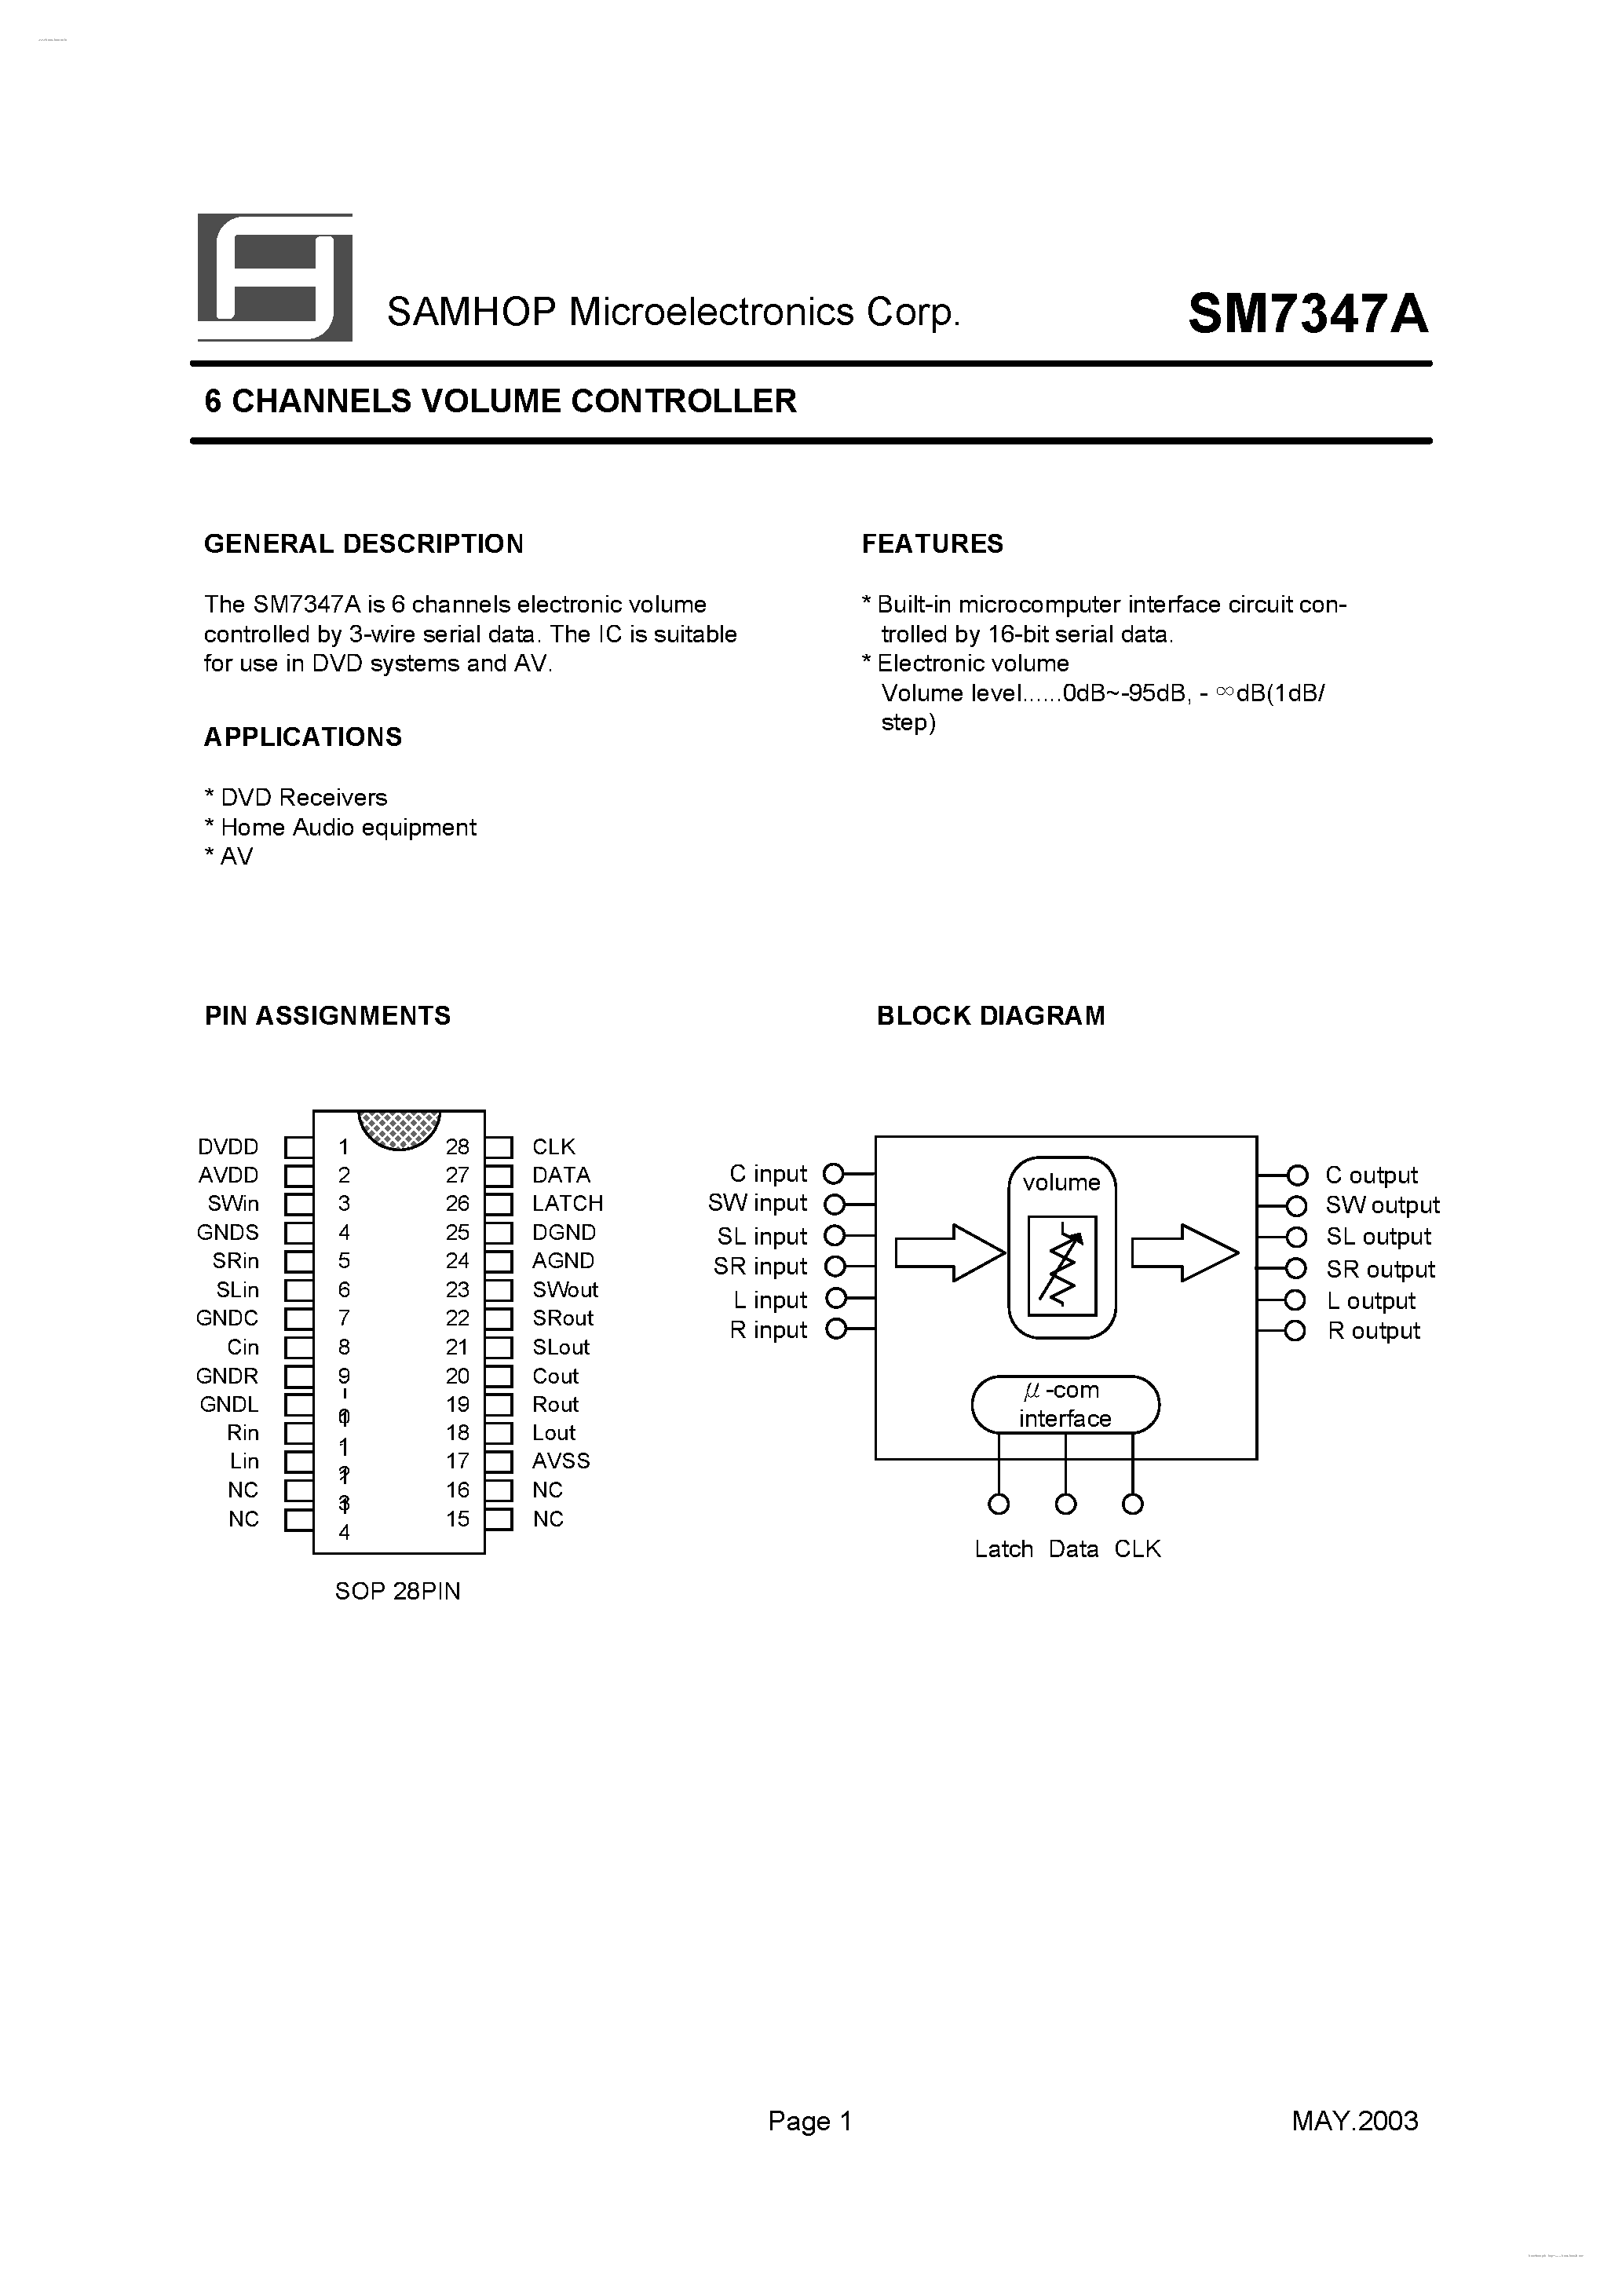 Datasheet SM7347A - 6 CHANNELS VOLUME CONTROLLER page 1